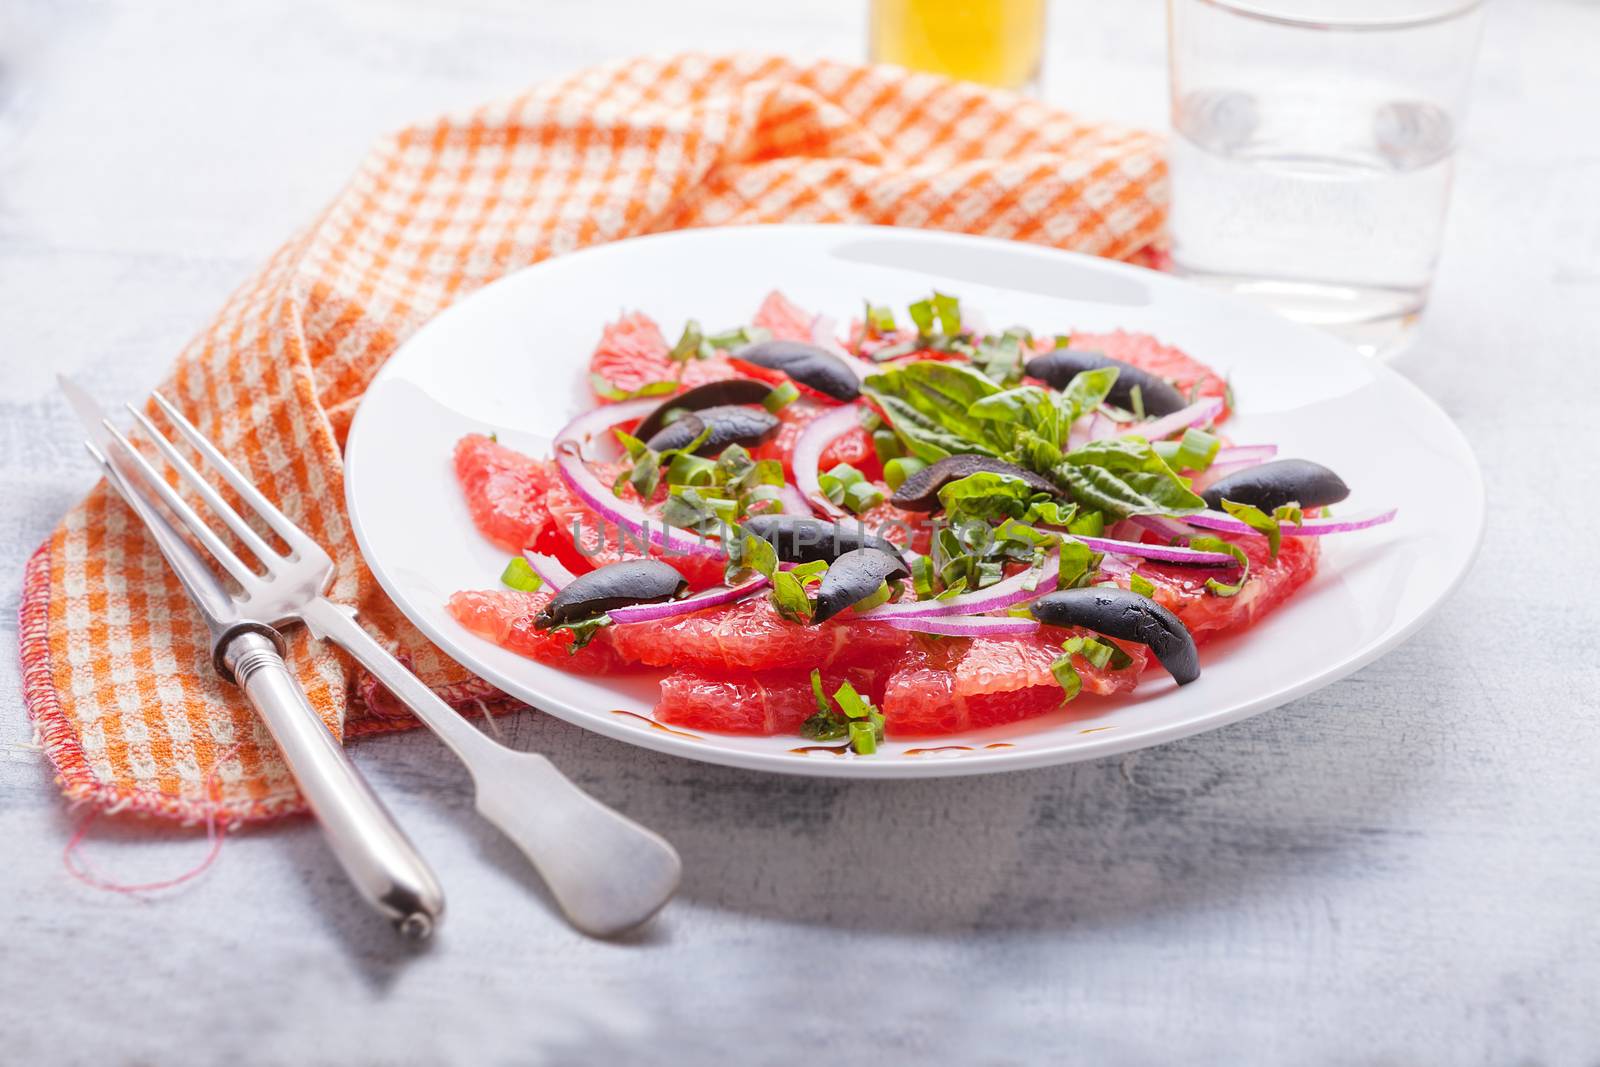 Grapefruit salad with olives, red onion basil